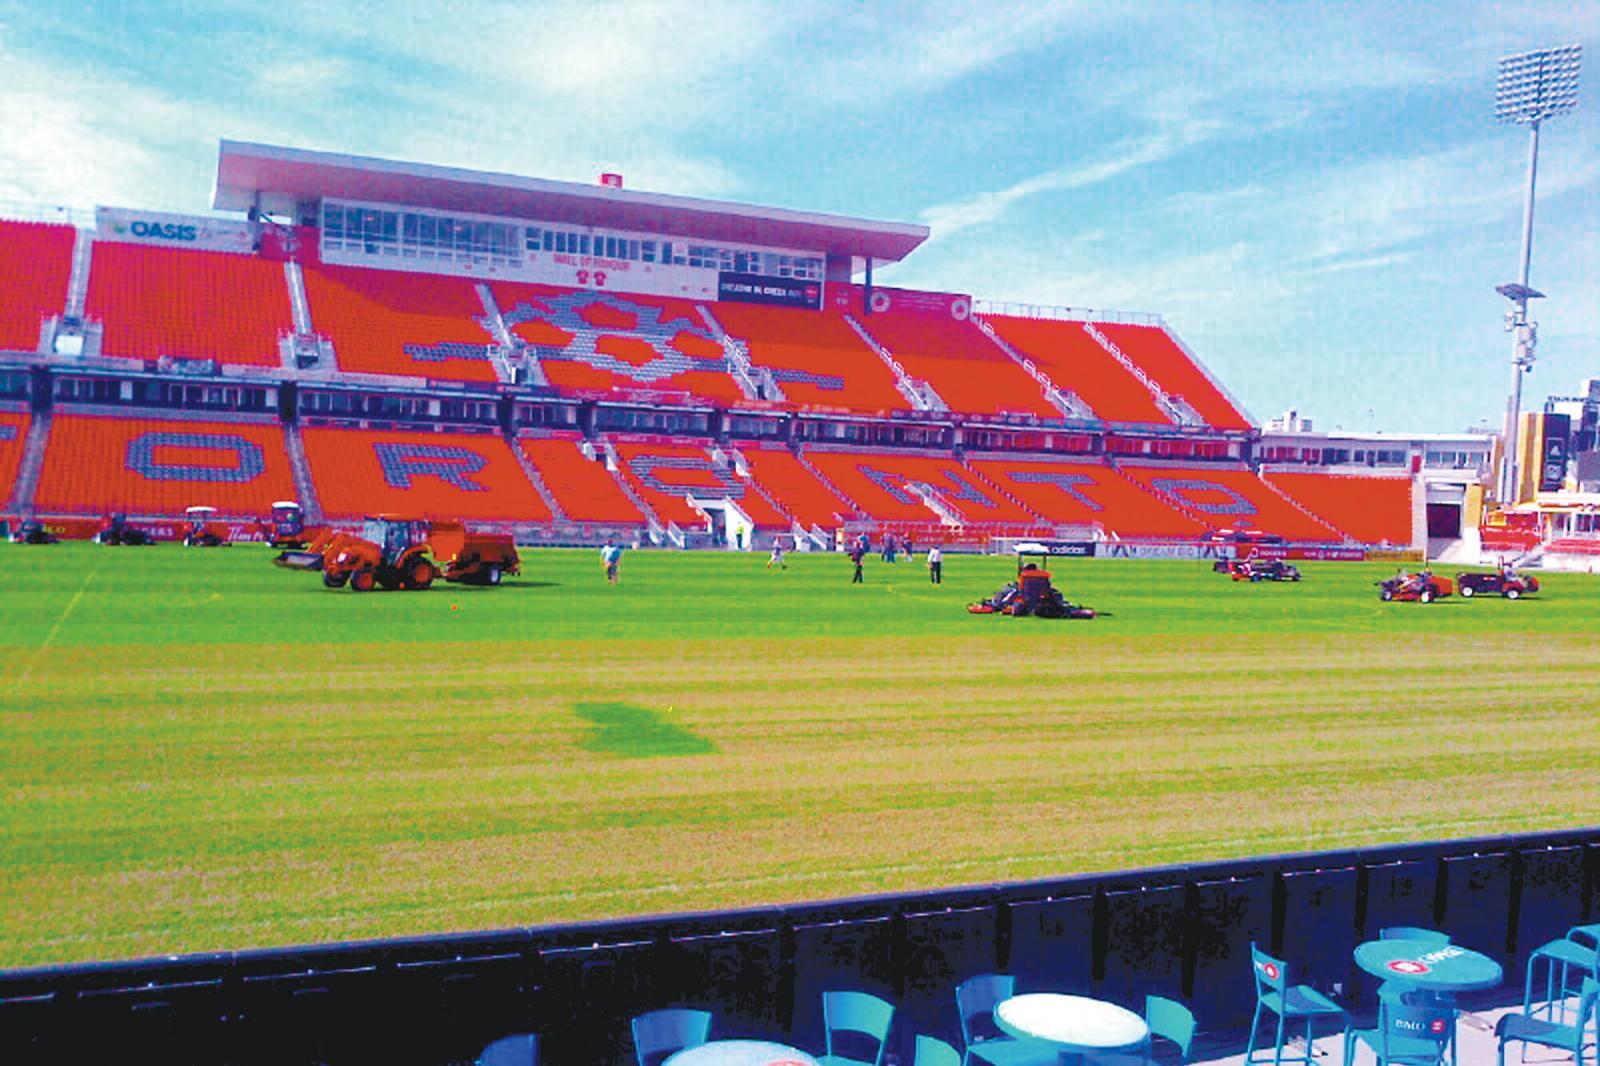 Turf Care holds second event at BMO Field